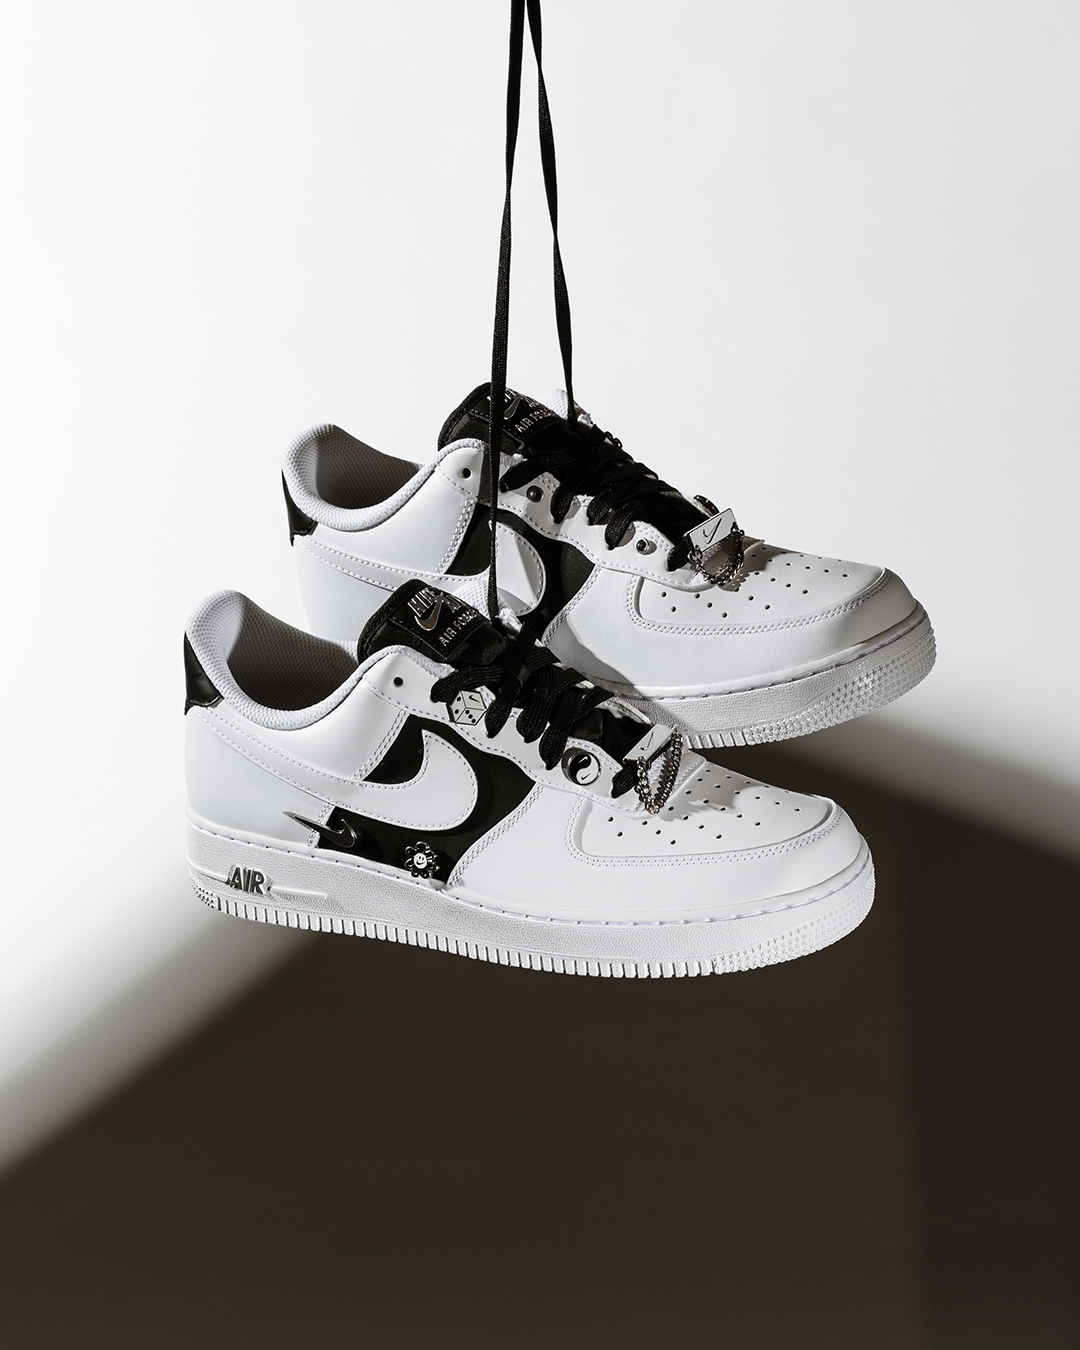 expandir ordenar Rodeado Foot Locker on Twitter: "A few pieces to complement the AF1 💎 #Nike Air  Force One 'Shoelery' available online + in-store. Shop:  https://t.co/t2QkOWHTv2 https://t.co/QSB8j0g1TP" / Twitter